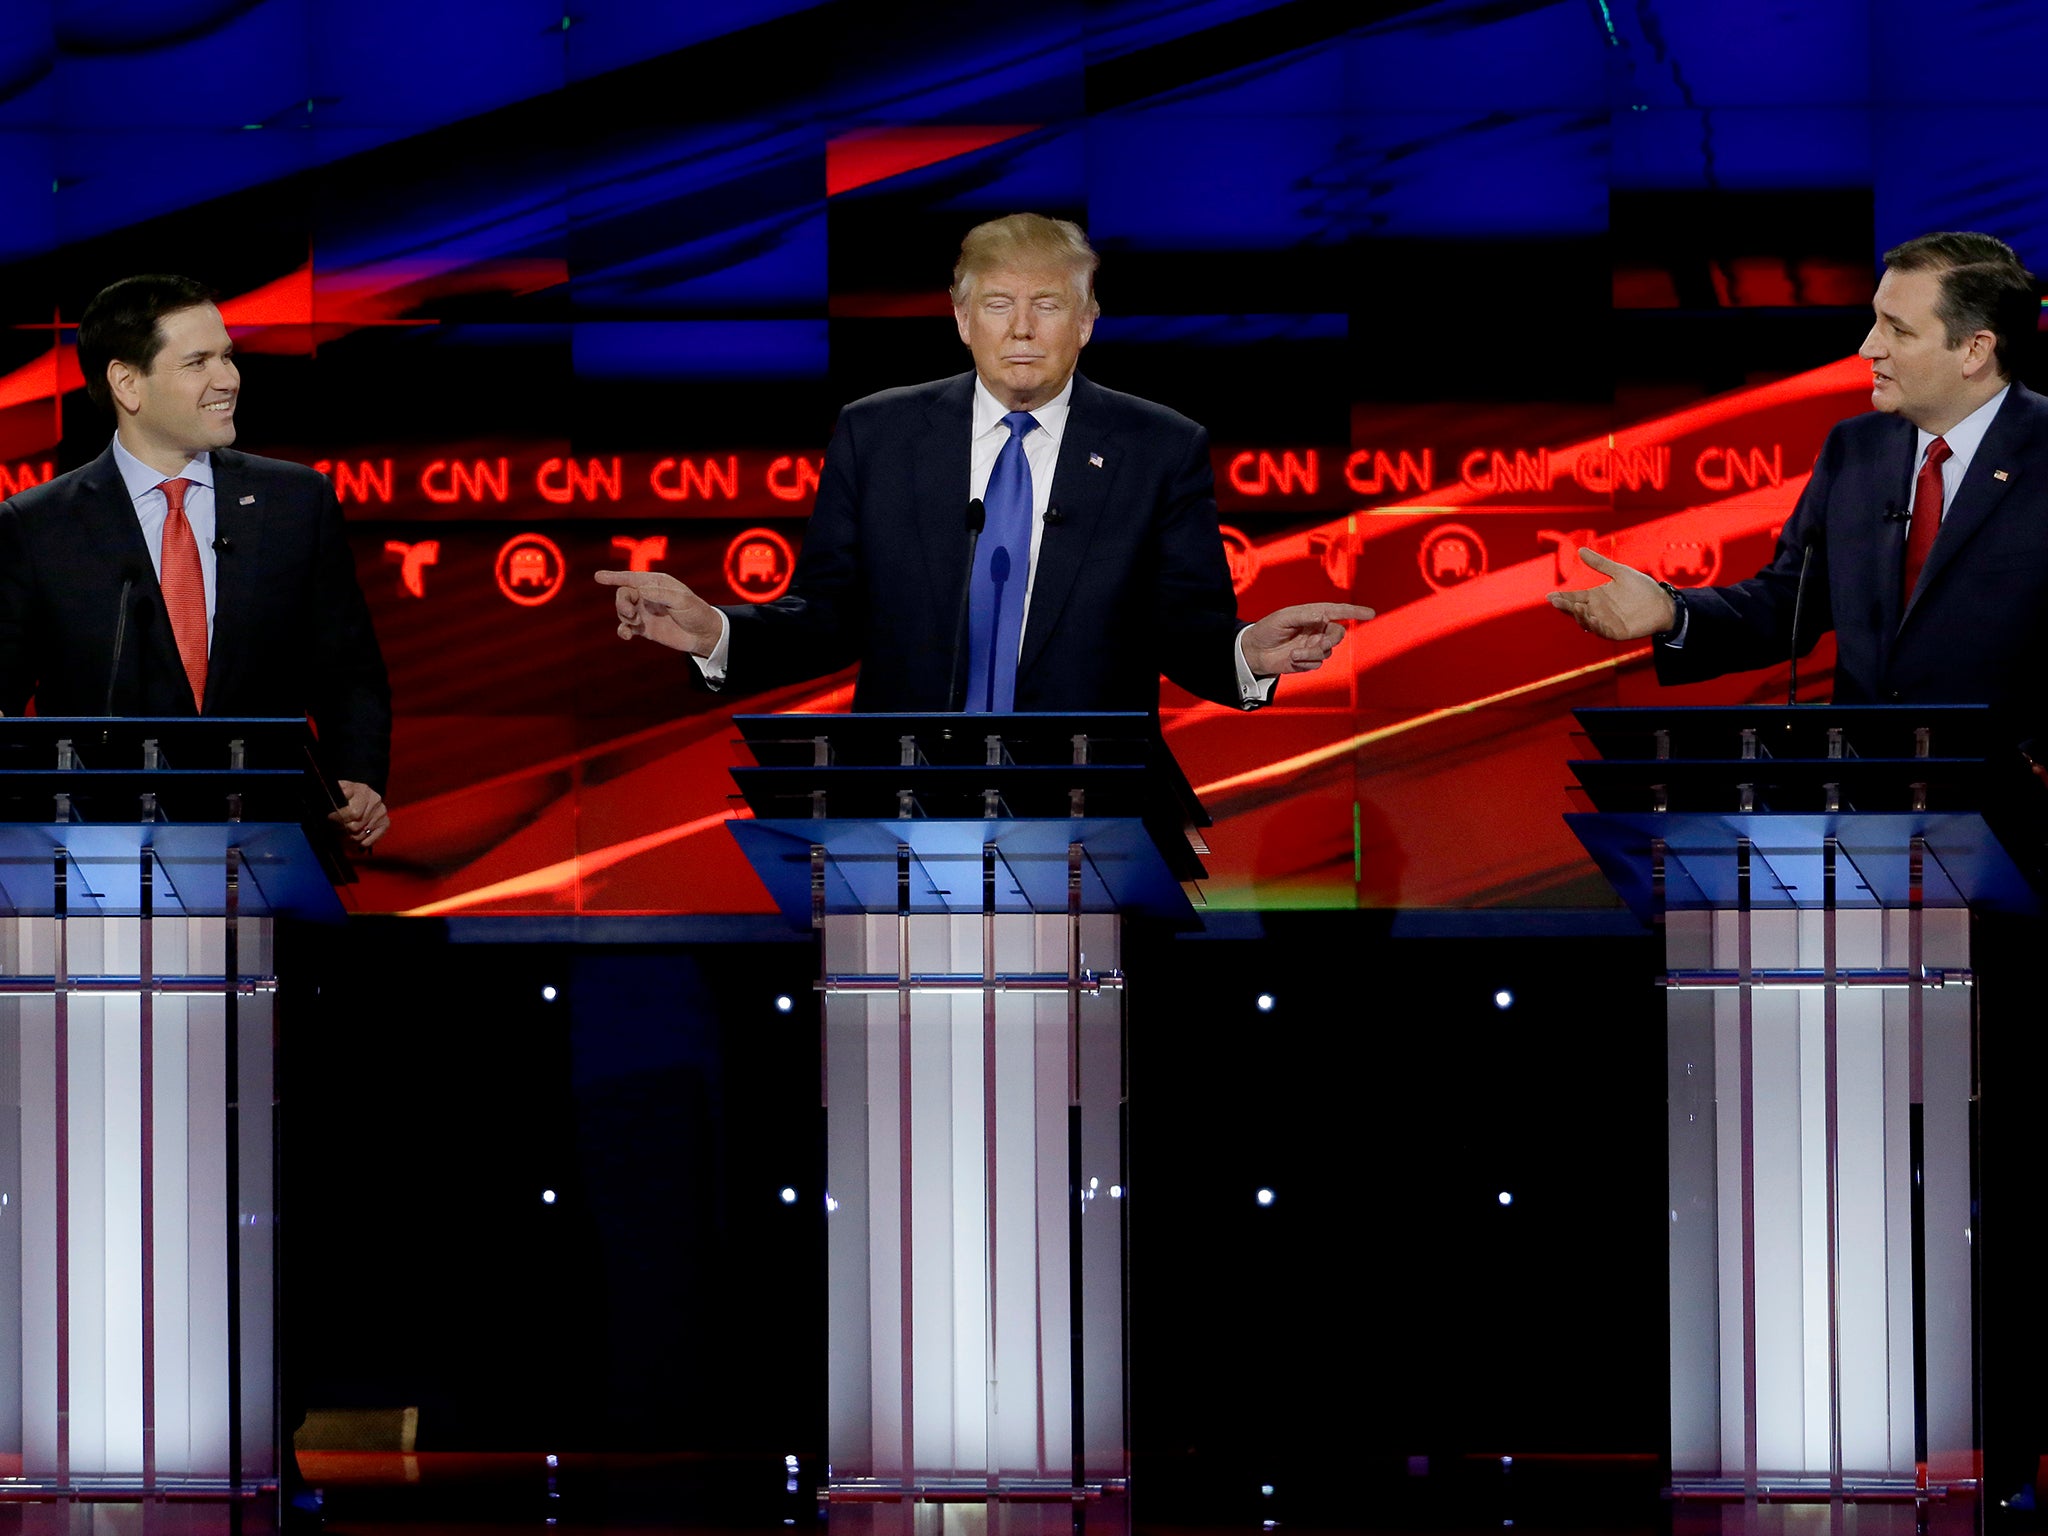 Republican presidential candidates, Sen. Marco Rubio, Donald Trump and Sen. Ted Cruz during the Republican presidential debate at the Moores School of Music at the University of Houston in Houston, Texas. The debate is the last before the March 1 Super Tuesday primaries.